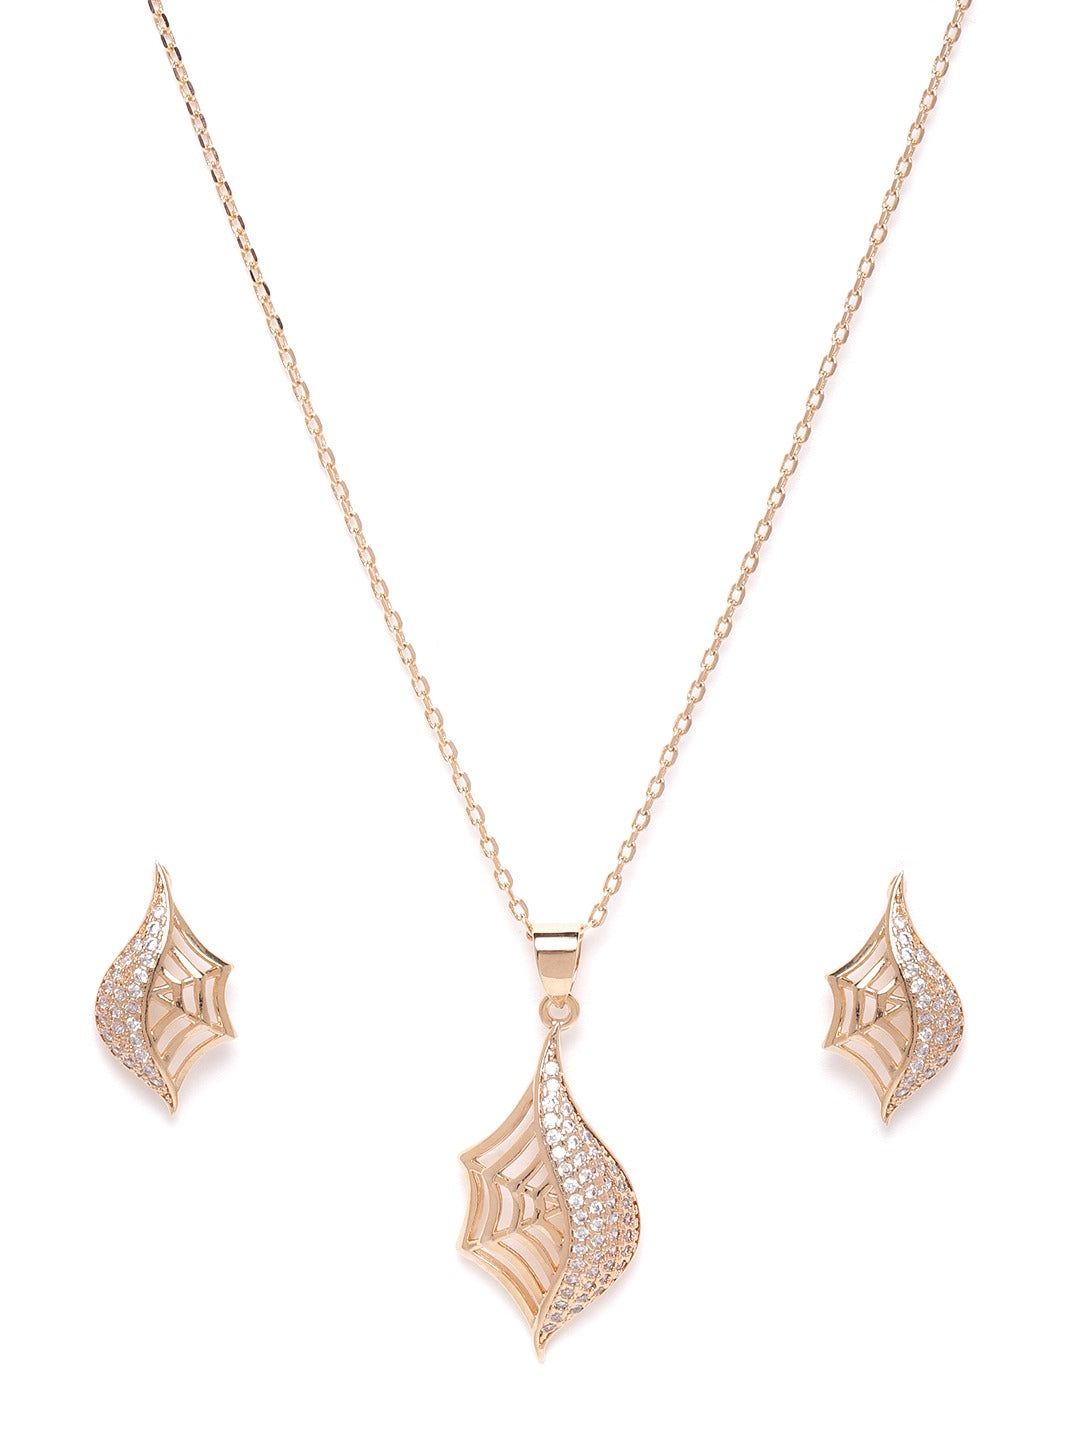 Rose Gold-Plated Handcrafted AD Stone-Studded Jewellery Set